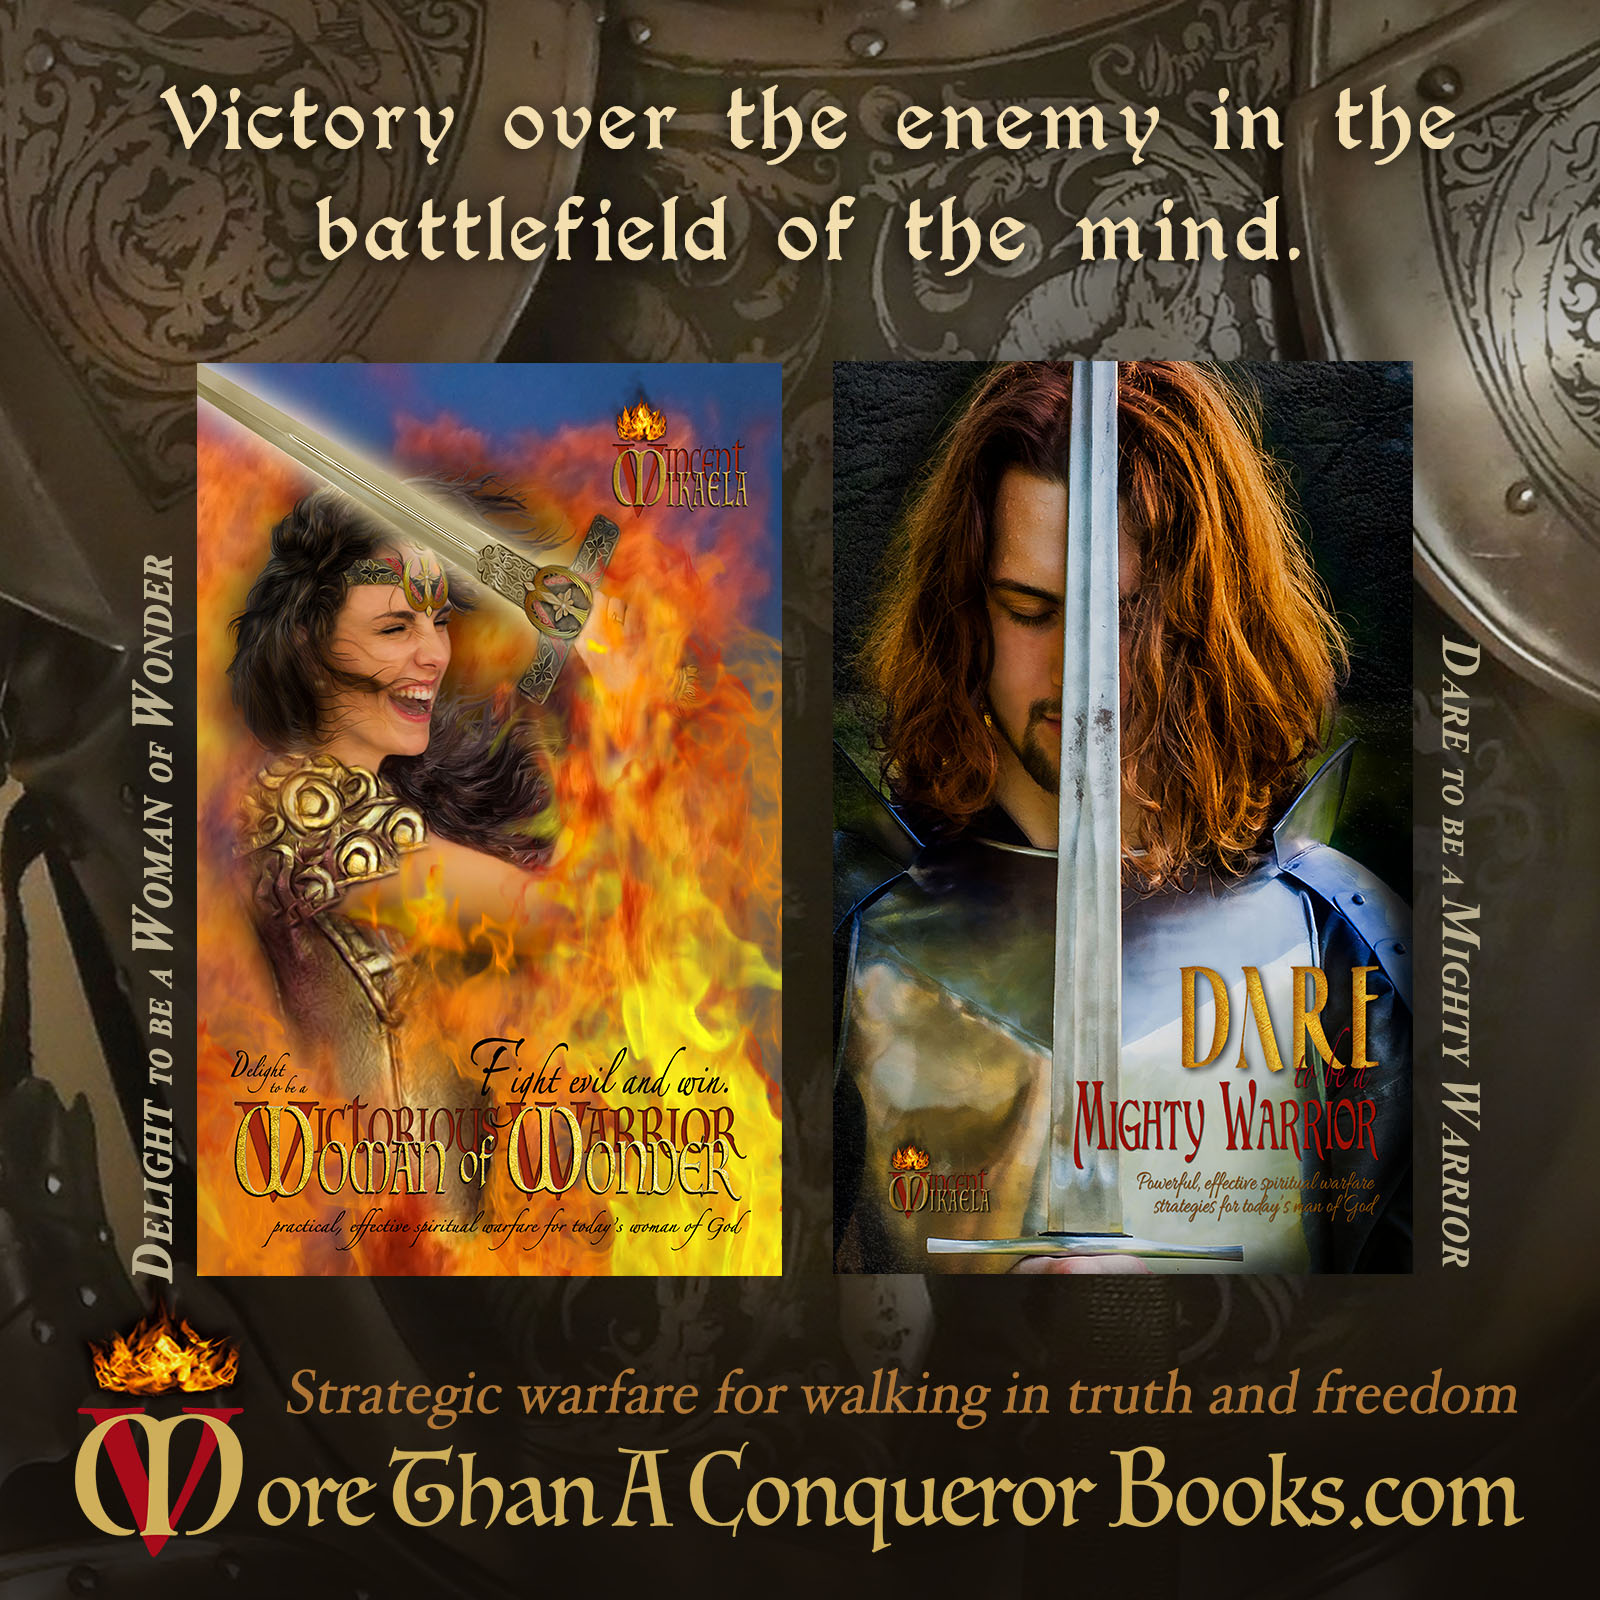 Victory over the enemy in the battlefield of the mind-Dare to Be a Mighty Warrior-Delight to Be a Woman of Wonder-Mikaela Vincent-MoreThanAConquerorBooks